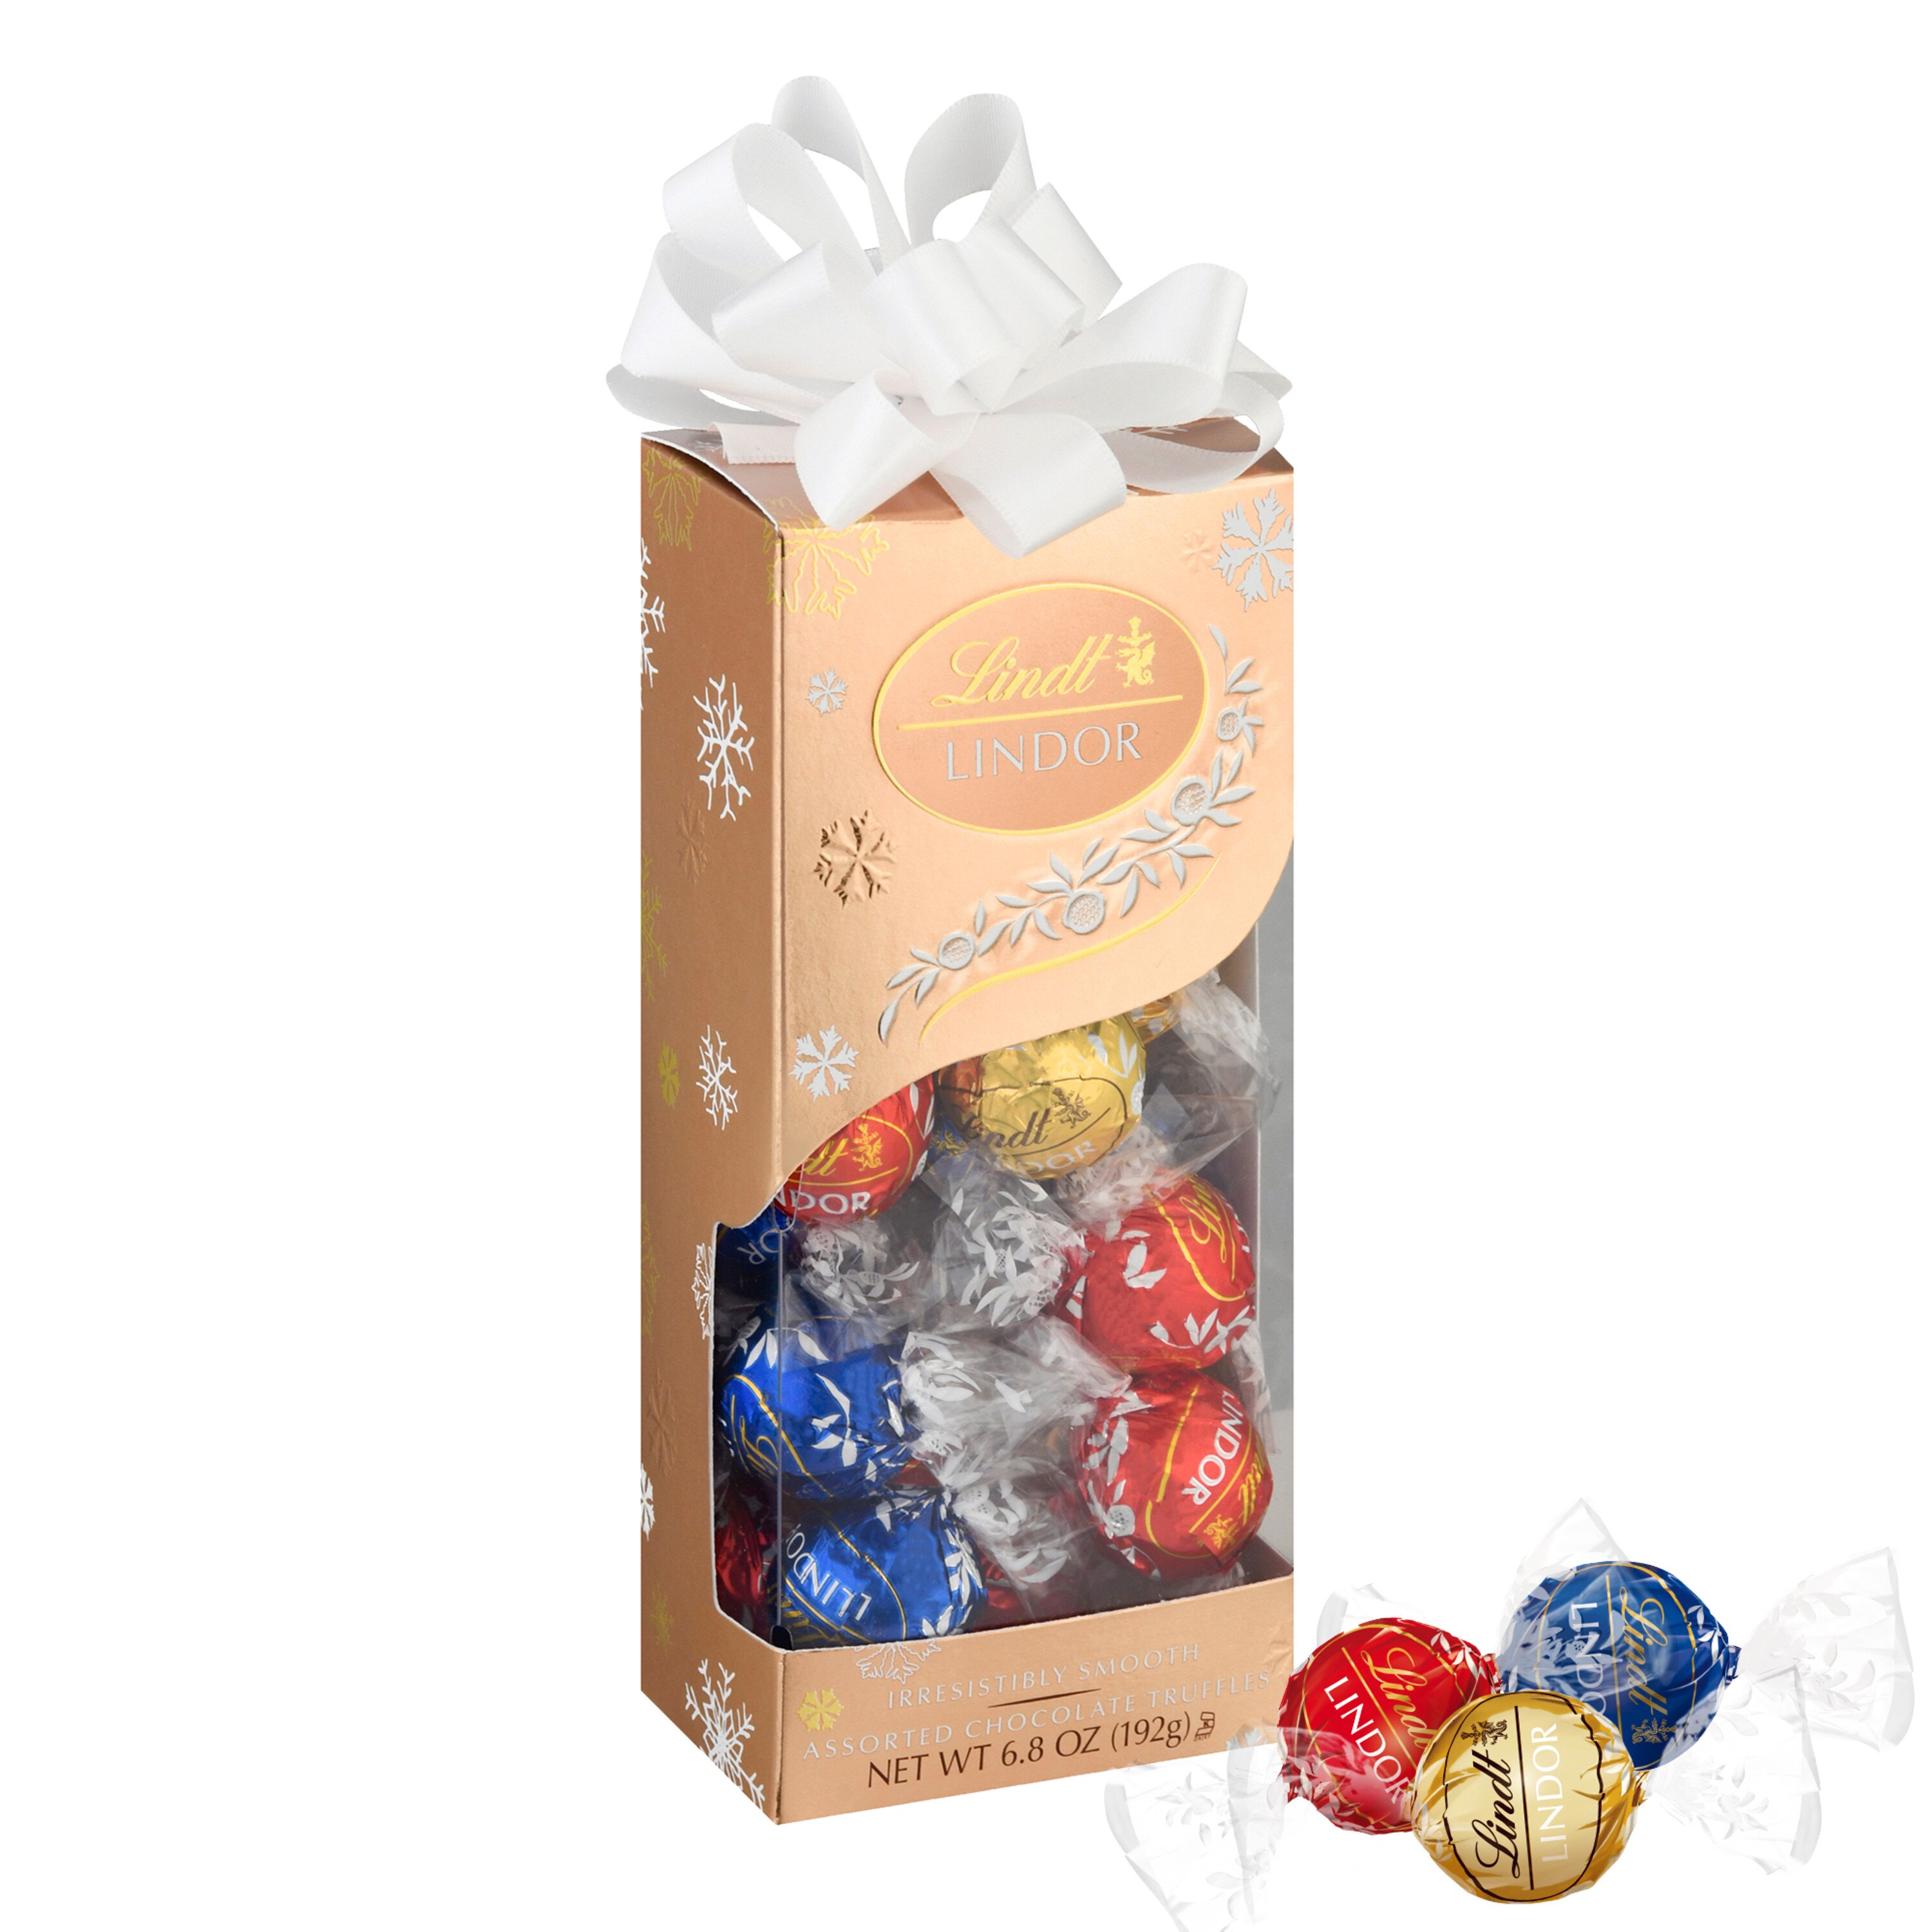 Lindt LINDOR Assorted Chocolate Truffles Traditions Gift Box, Assorted Chocolates with Smooth, Melting Truffle Center, 6.8 oz.